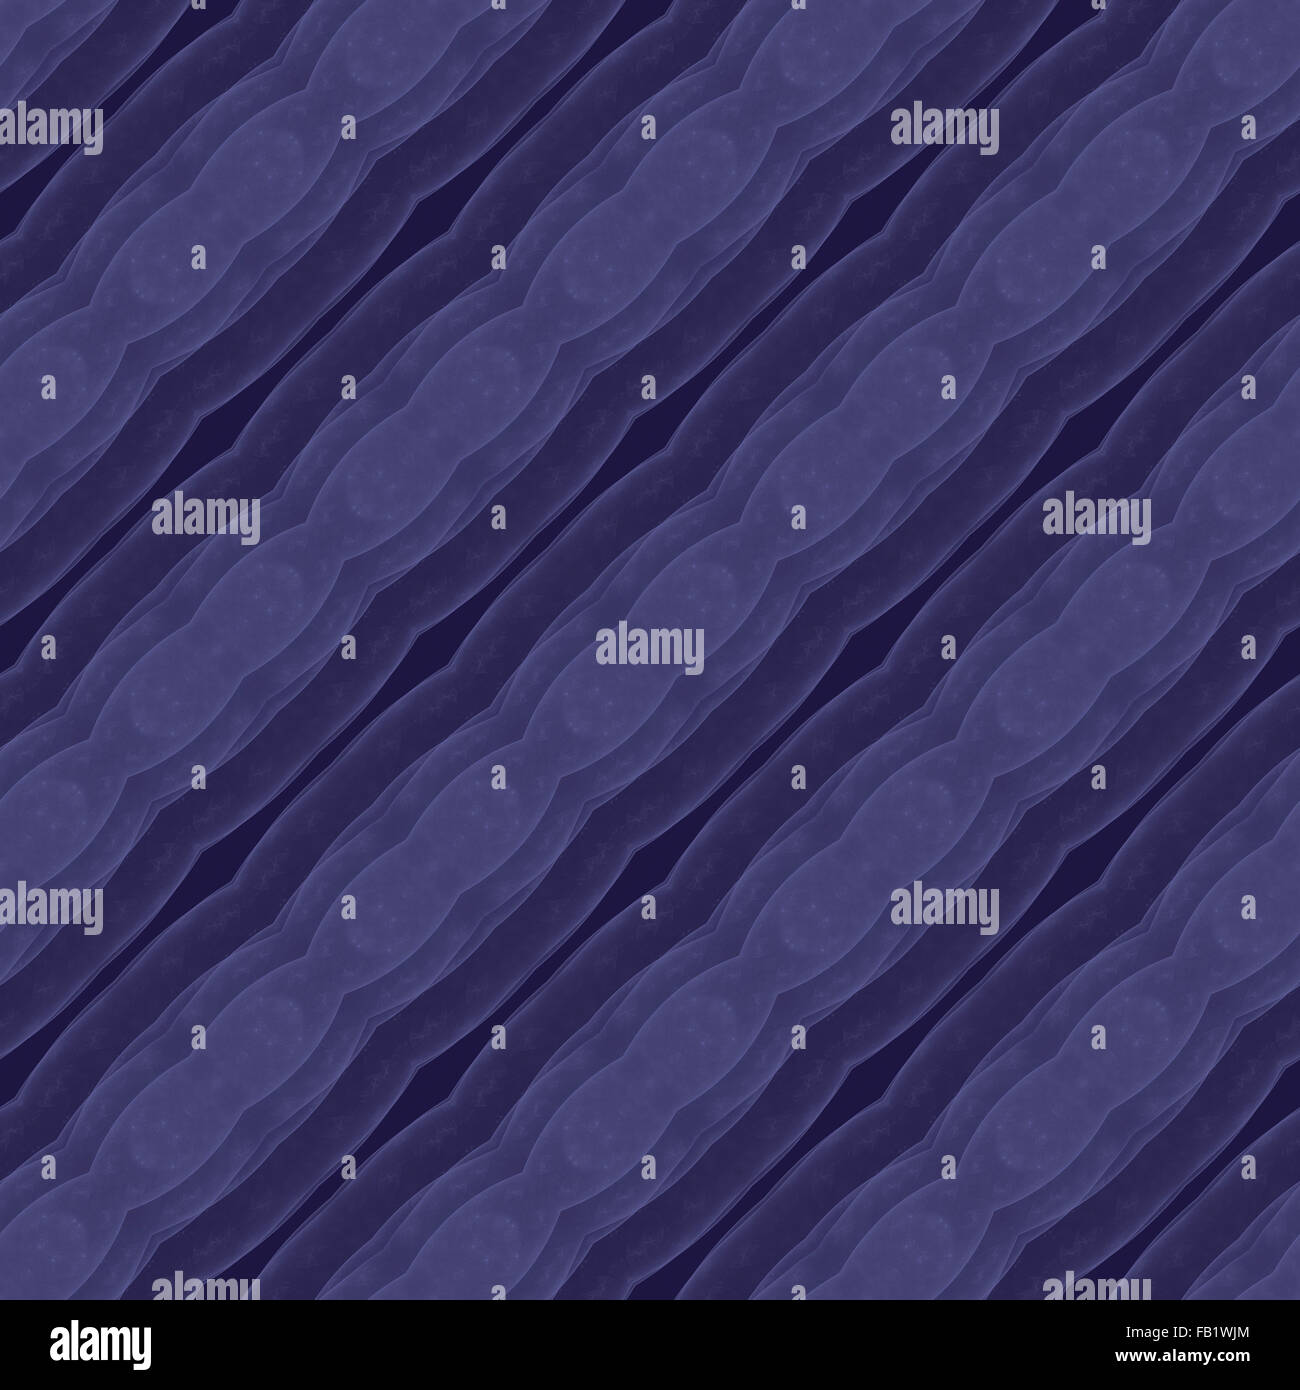 Abstract fractal seamless background or pattern in dark blue. Design element. Stock Photo